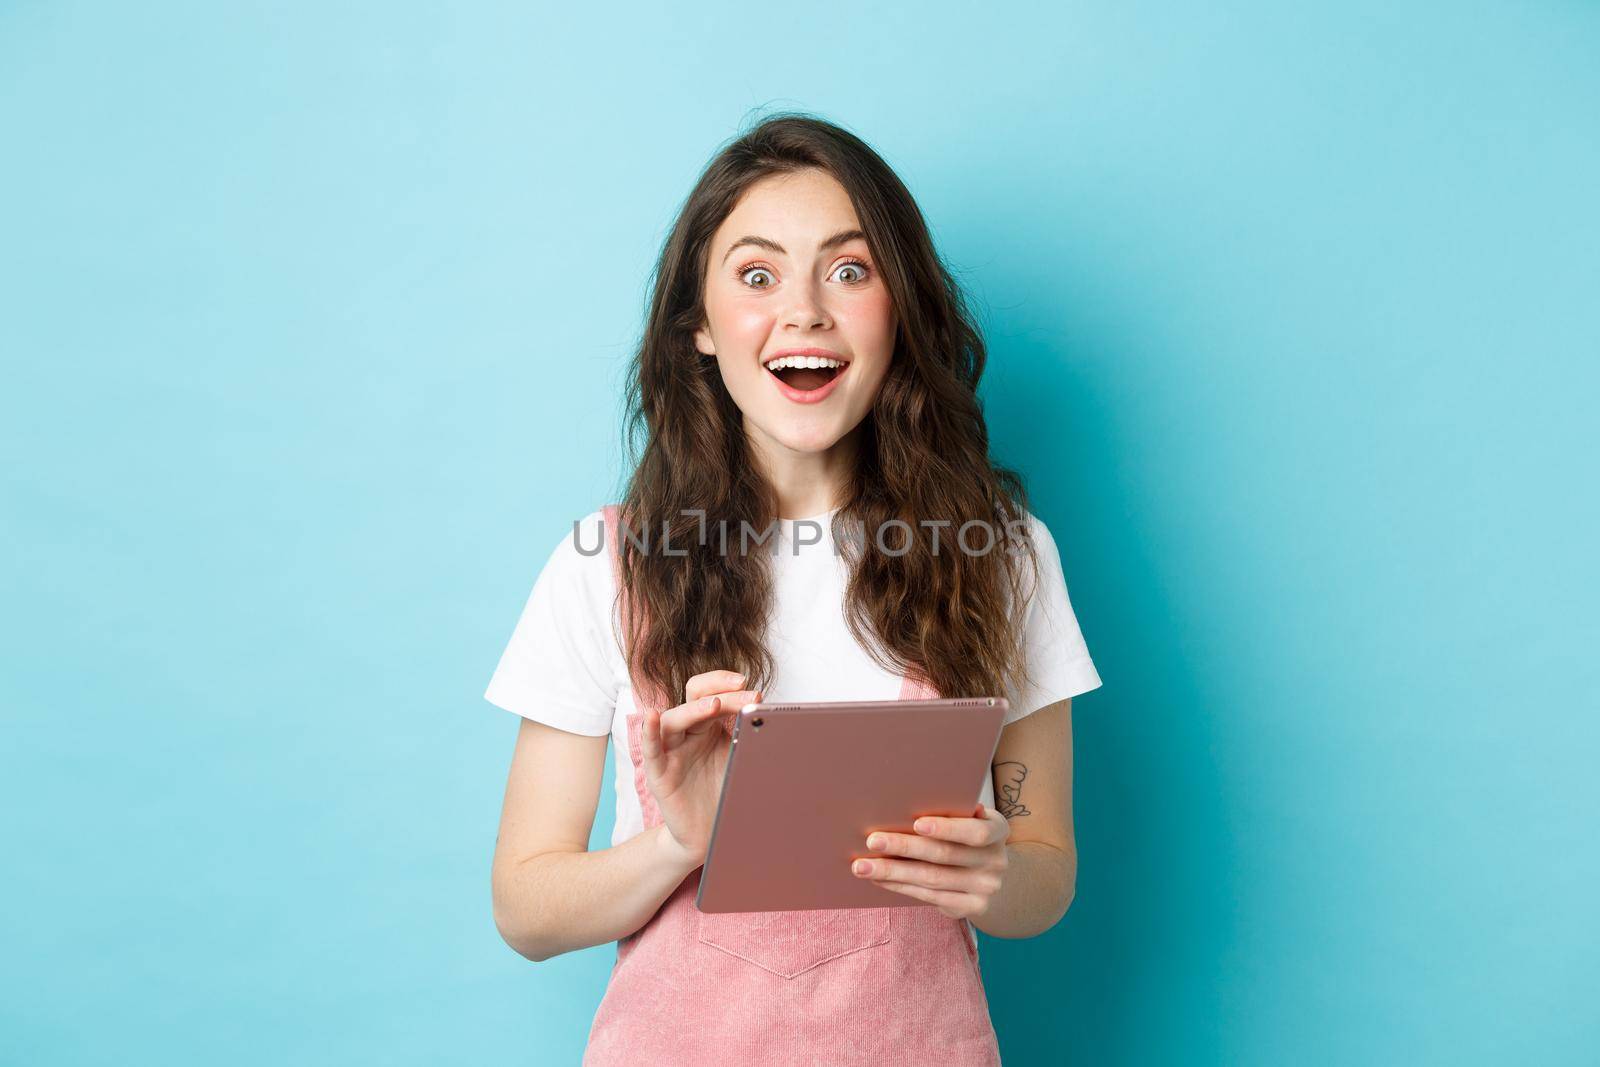 Excited smiling woman holding digital tablet, staring amazed at camera after seeing cool offer online, standing against blue background.